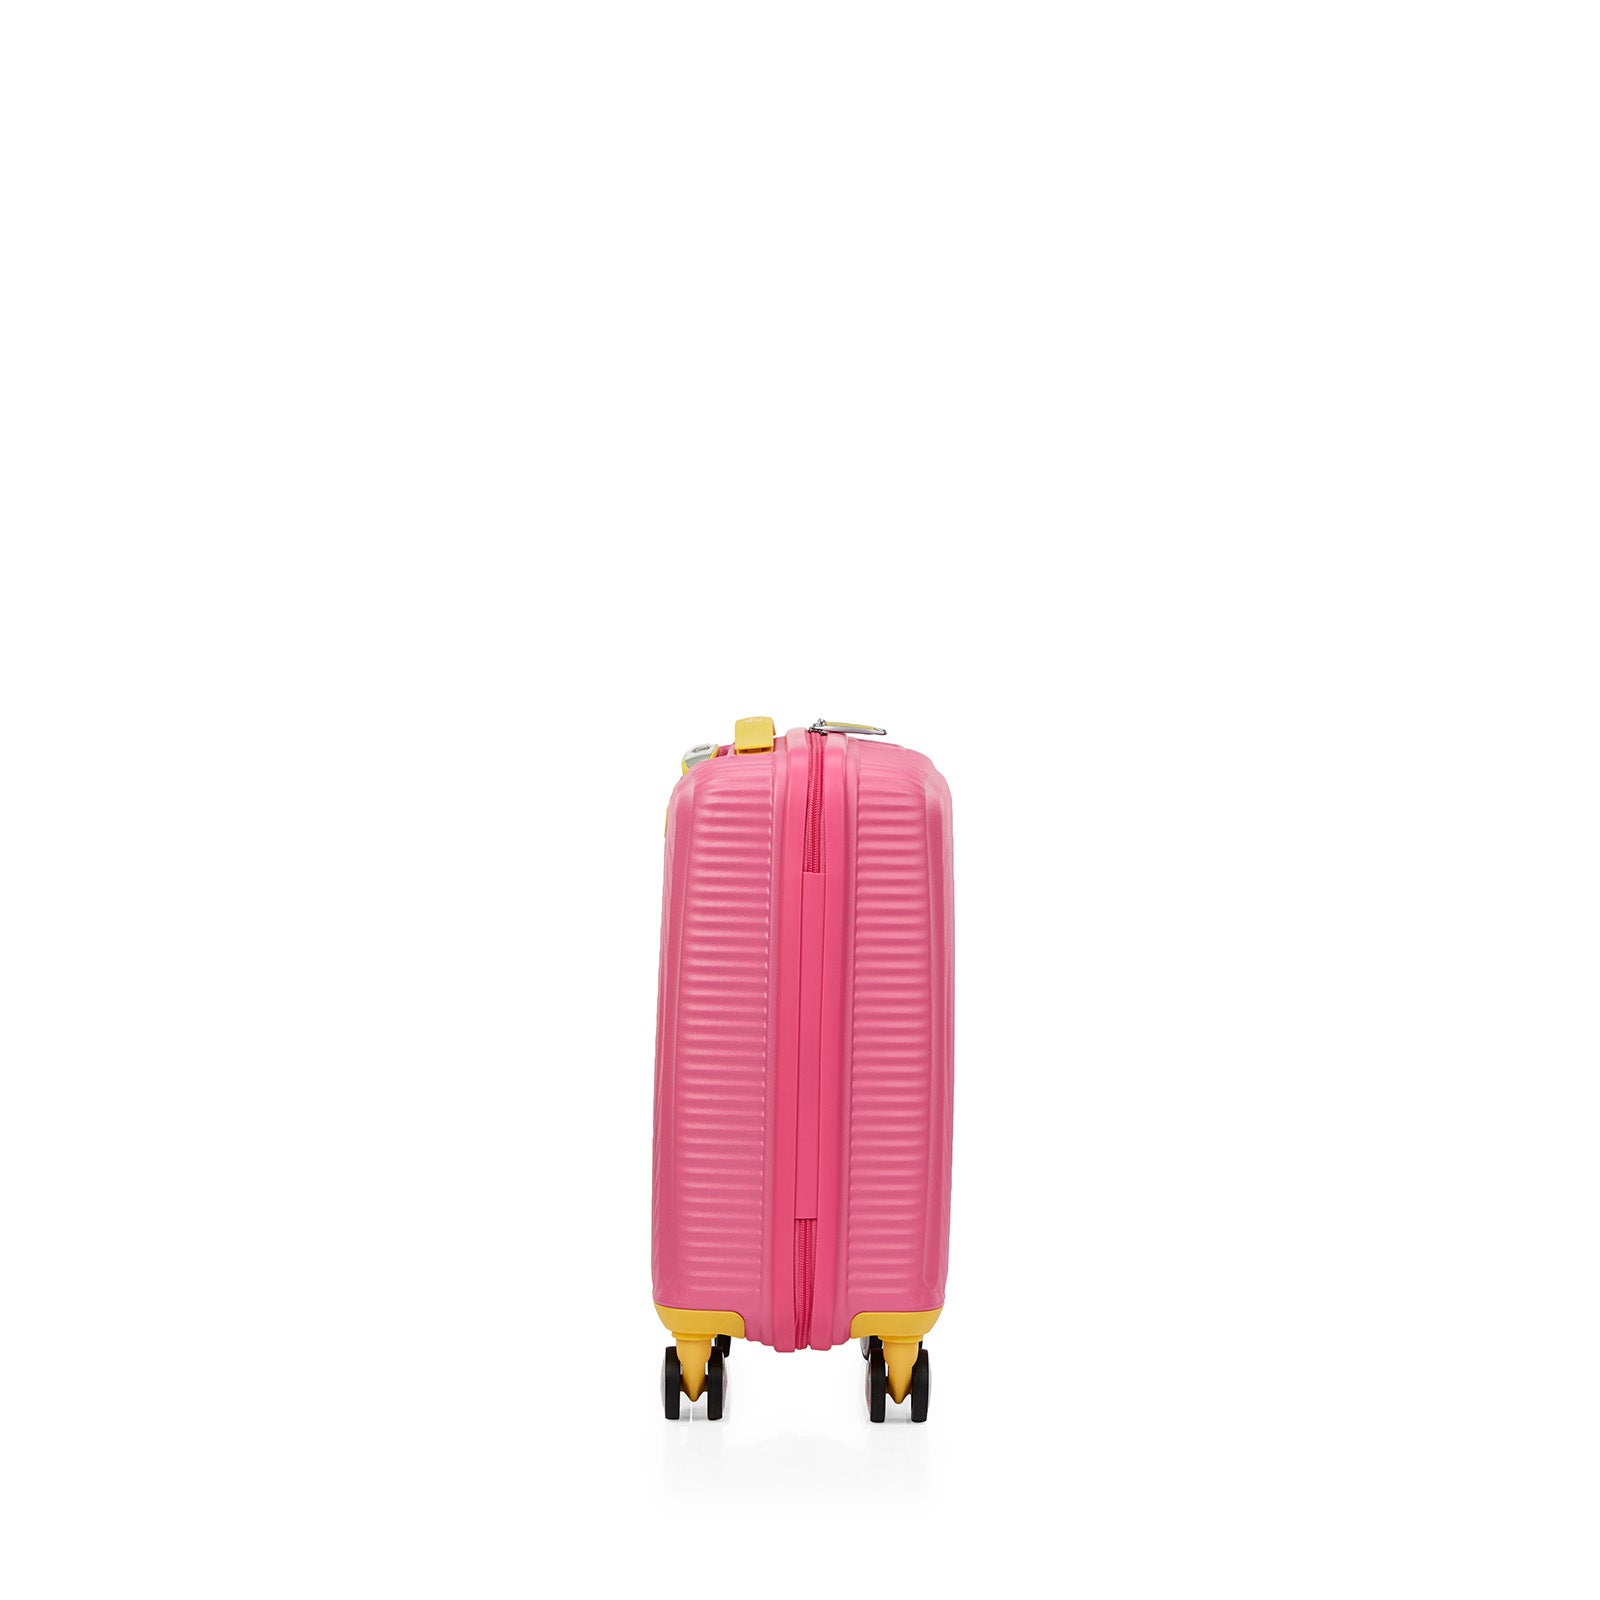 American-Tourister-Little-Curio-47cm-Carry-On-Suitcase-Pink-Yellow-Side-1